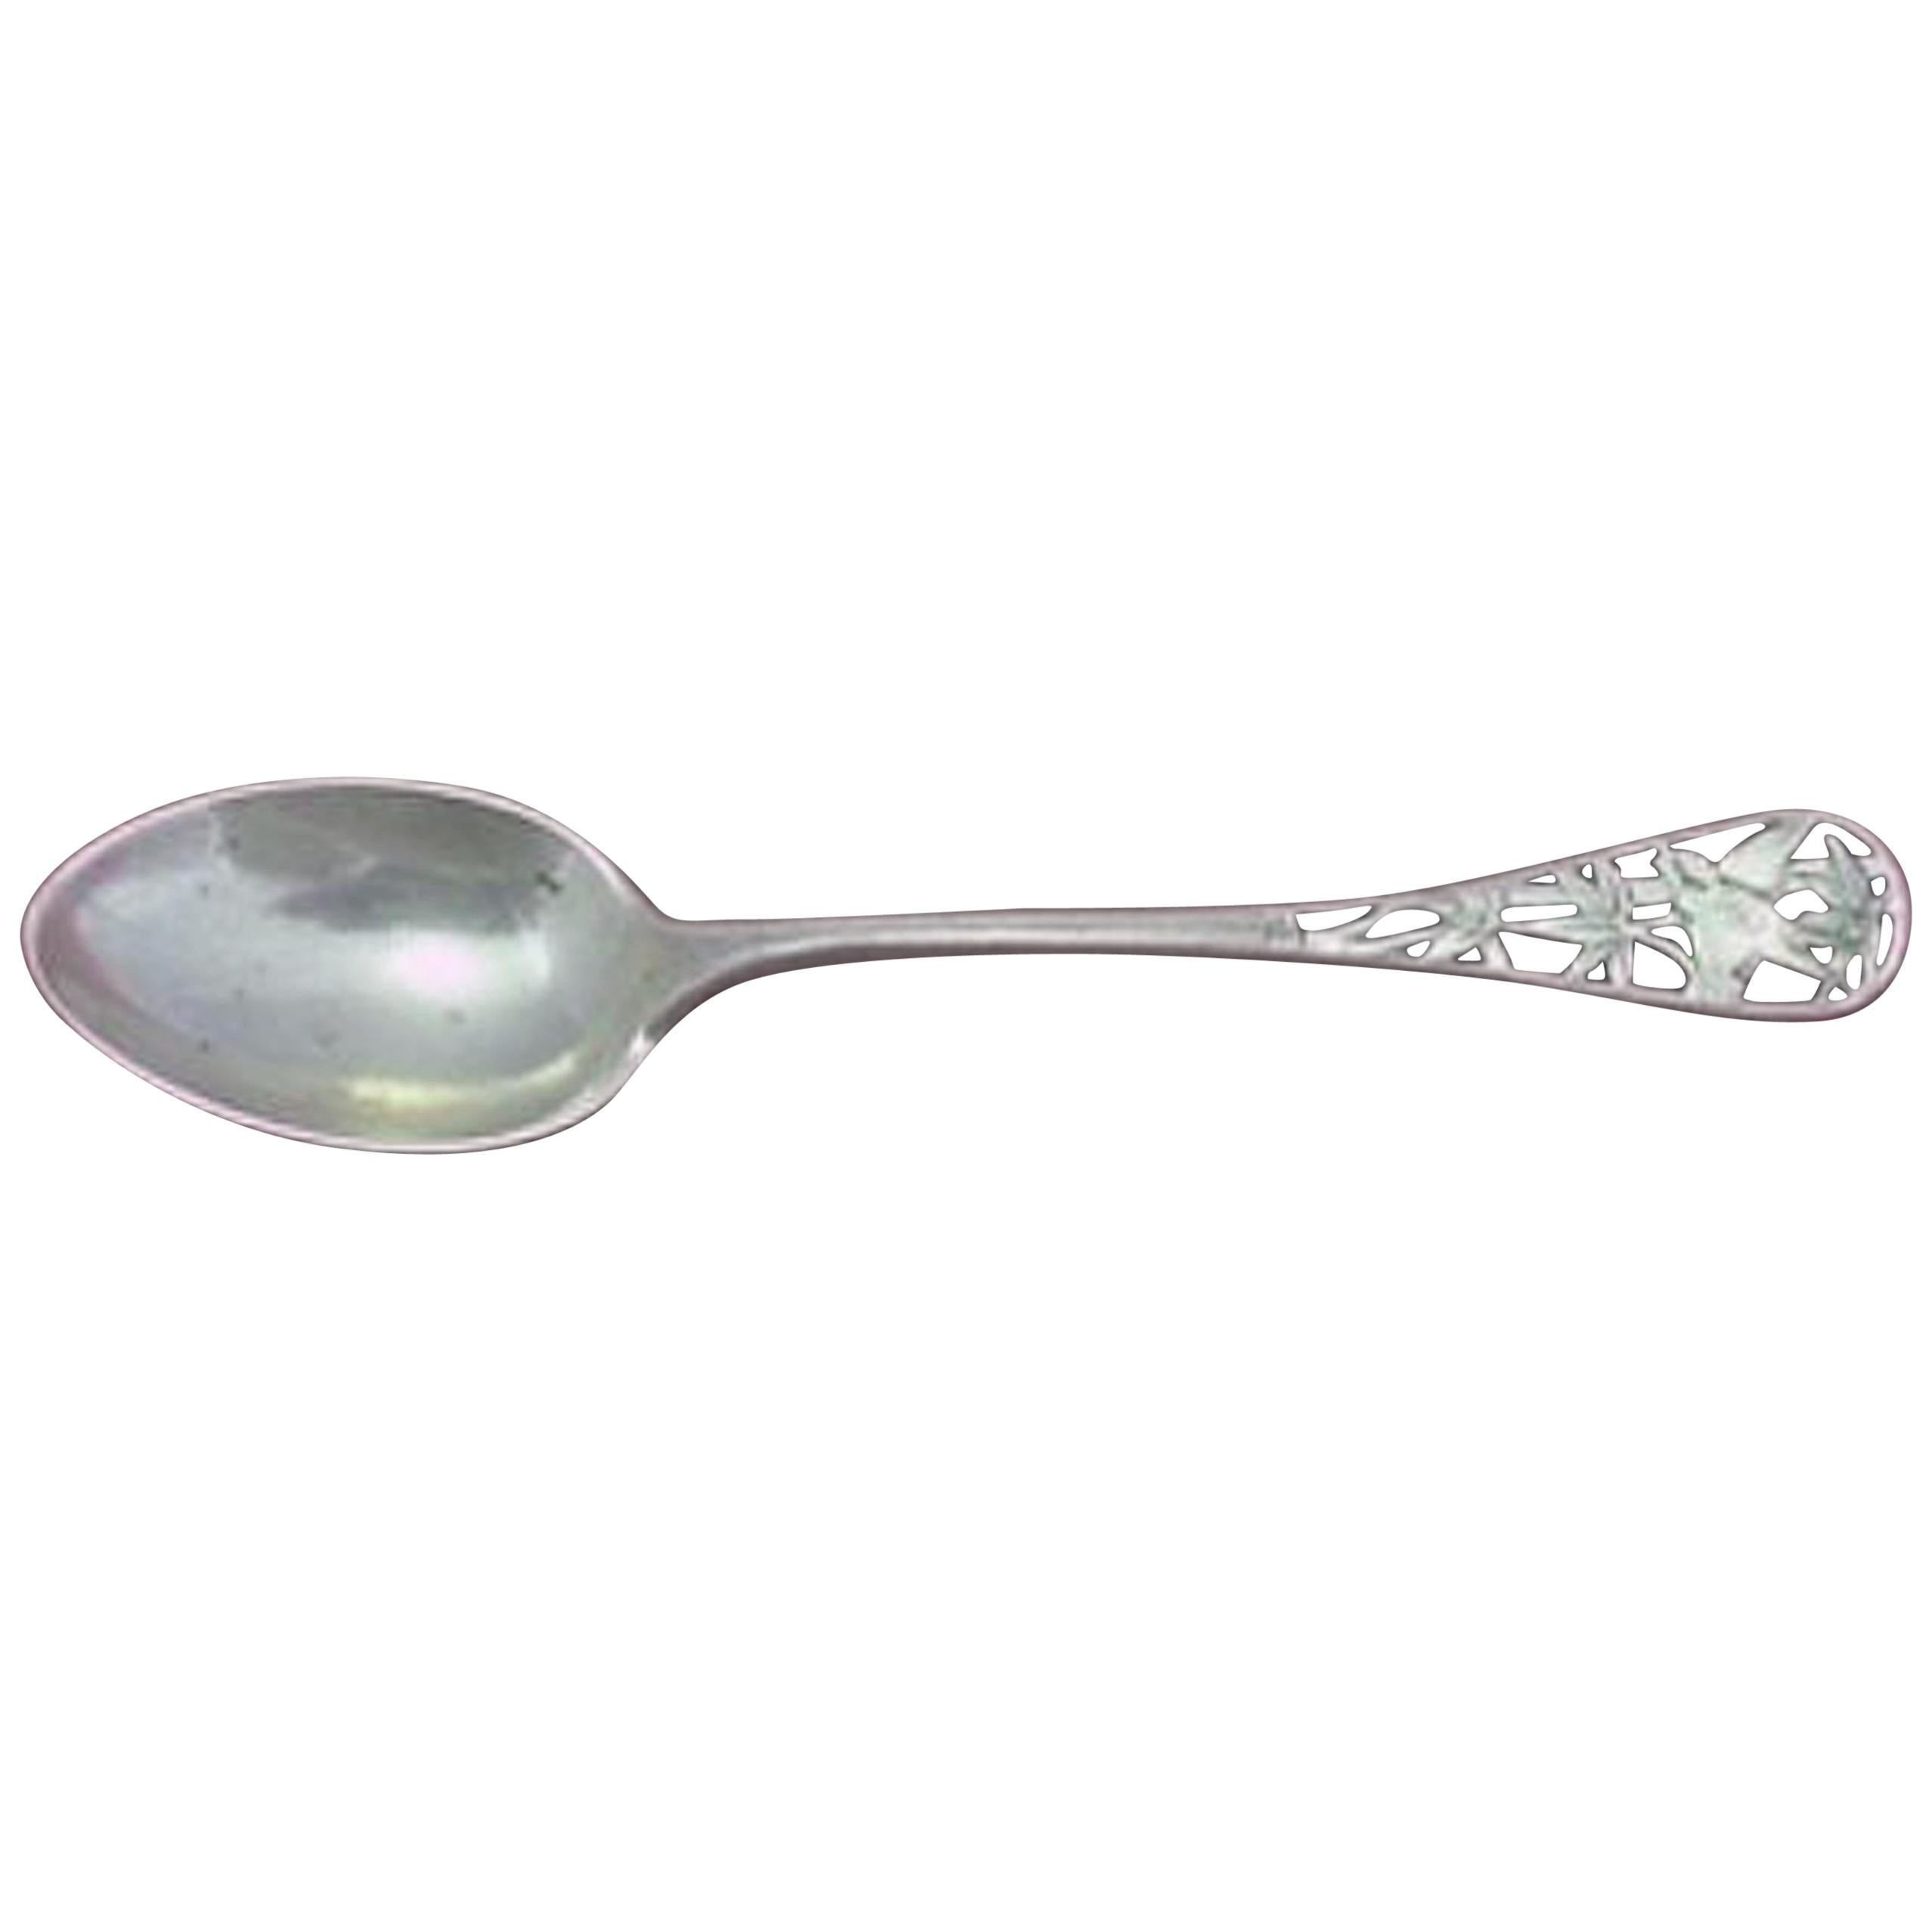 Tiffany & Co. Sterling Silver Demitasse Spoon Pierced with Bird